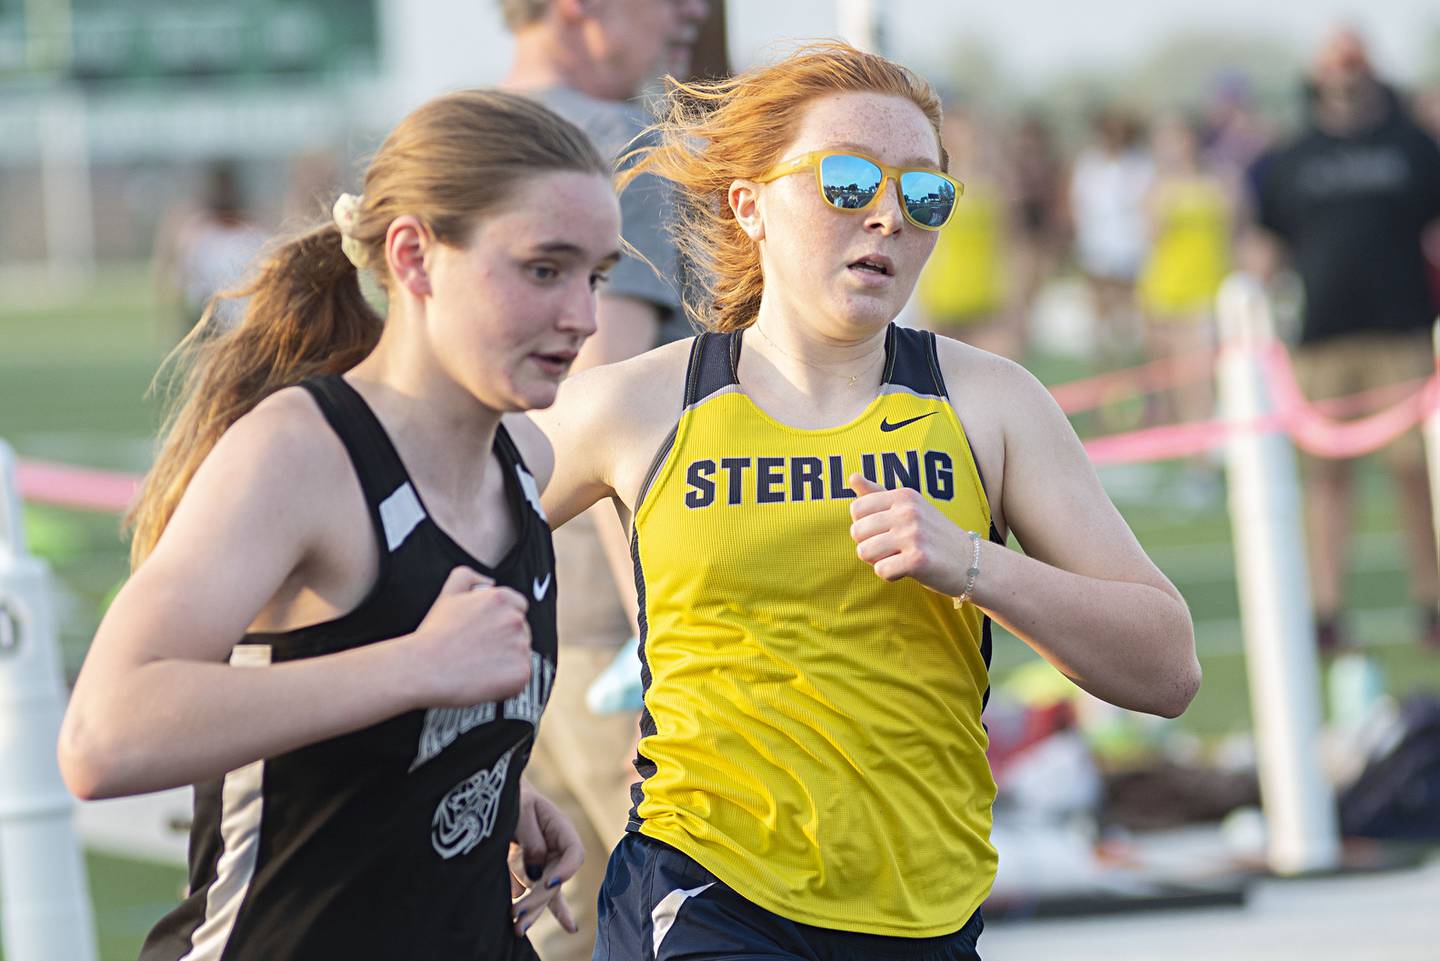 Rock Falls' Tayli Hultin (left) and Sterling's Kylie Nicklaus run in the 800 at the 2A track sectionals in Geneseo on Wednesday, May 11, 2022.